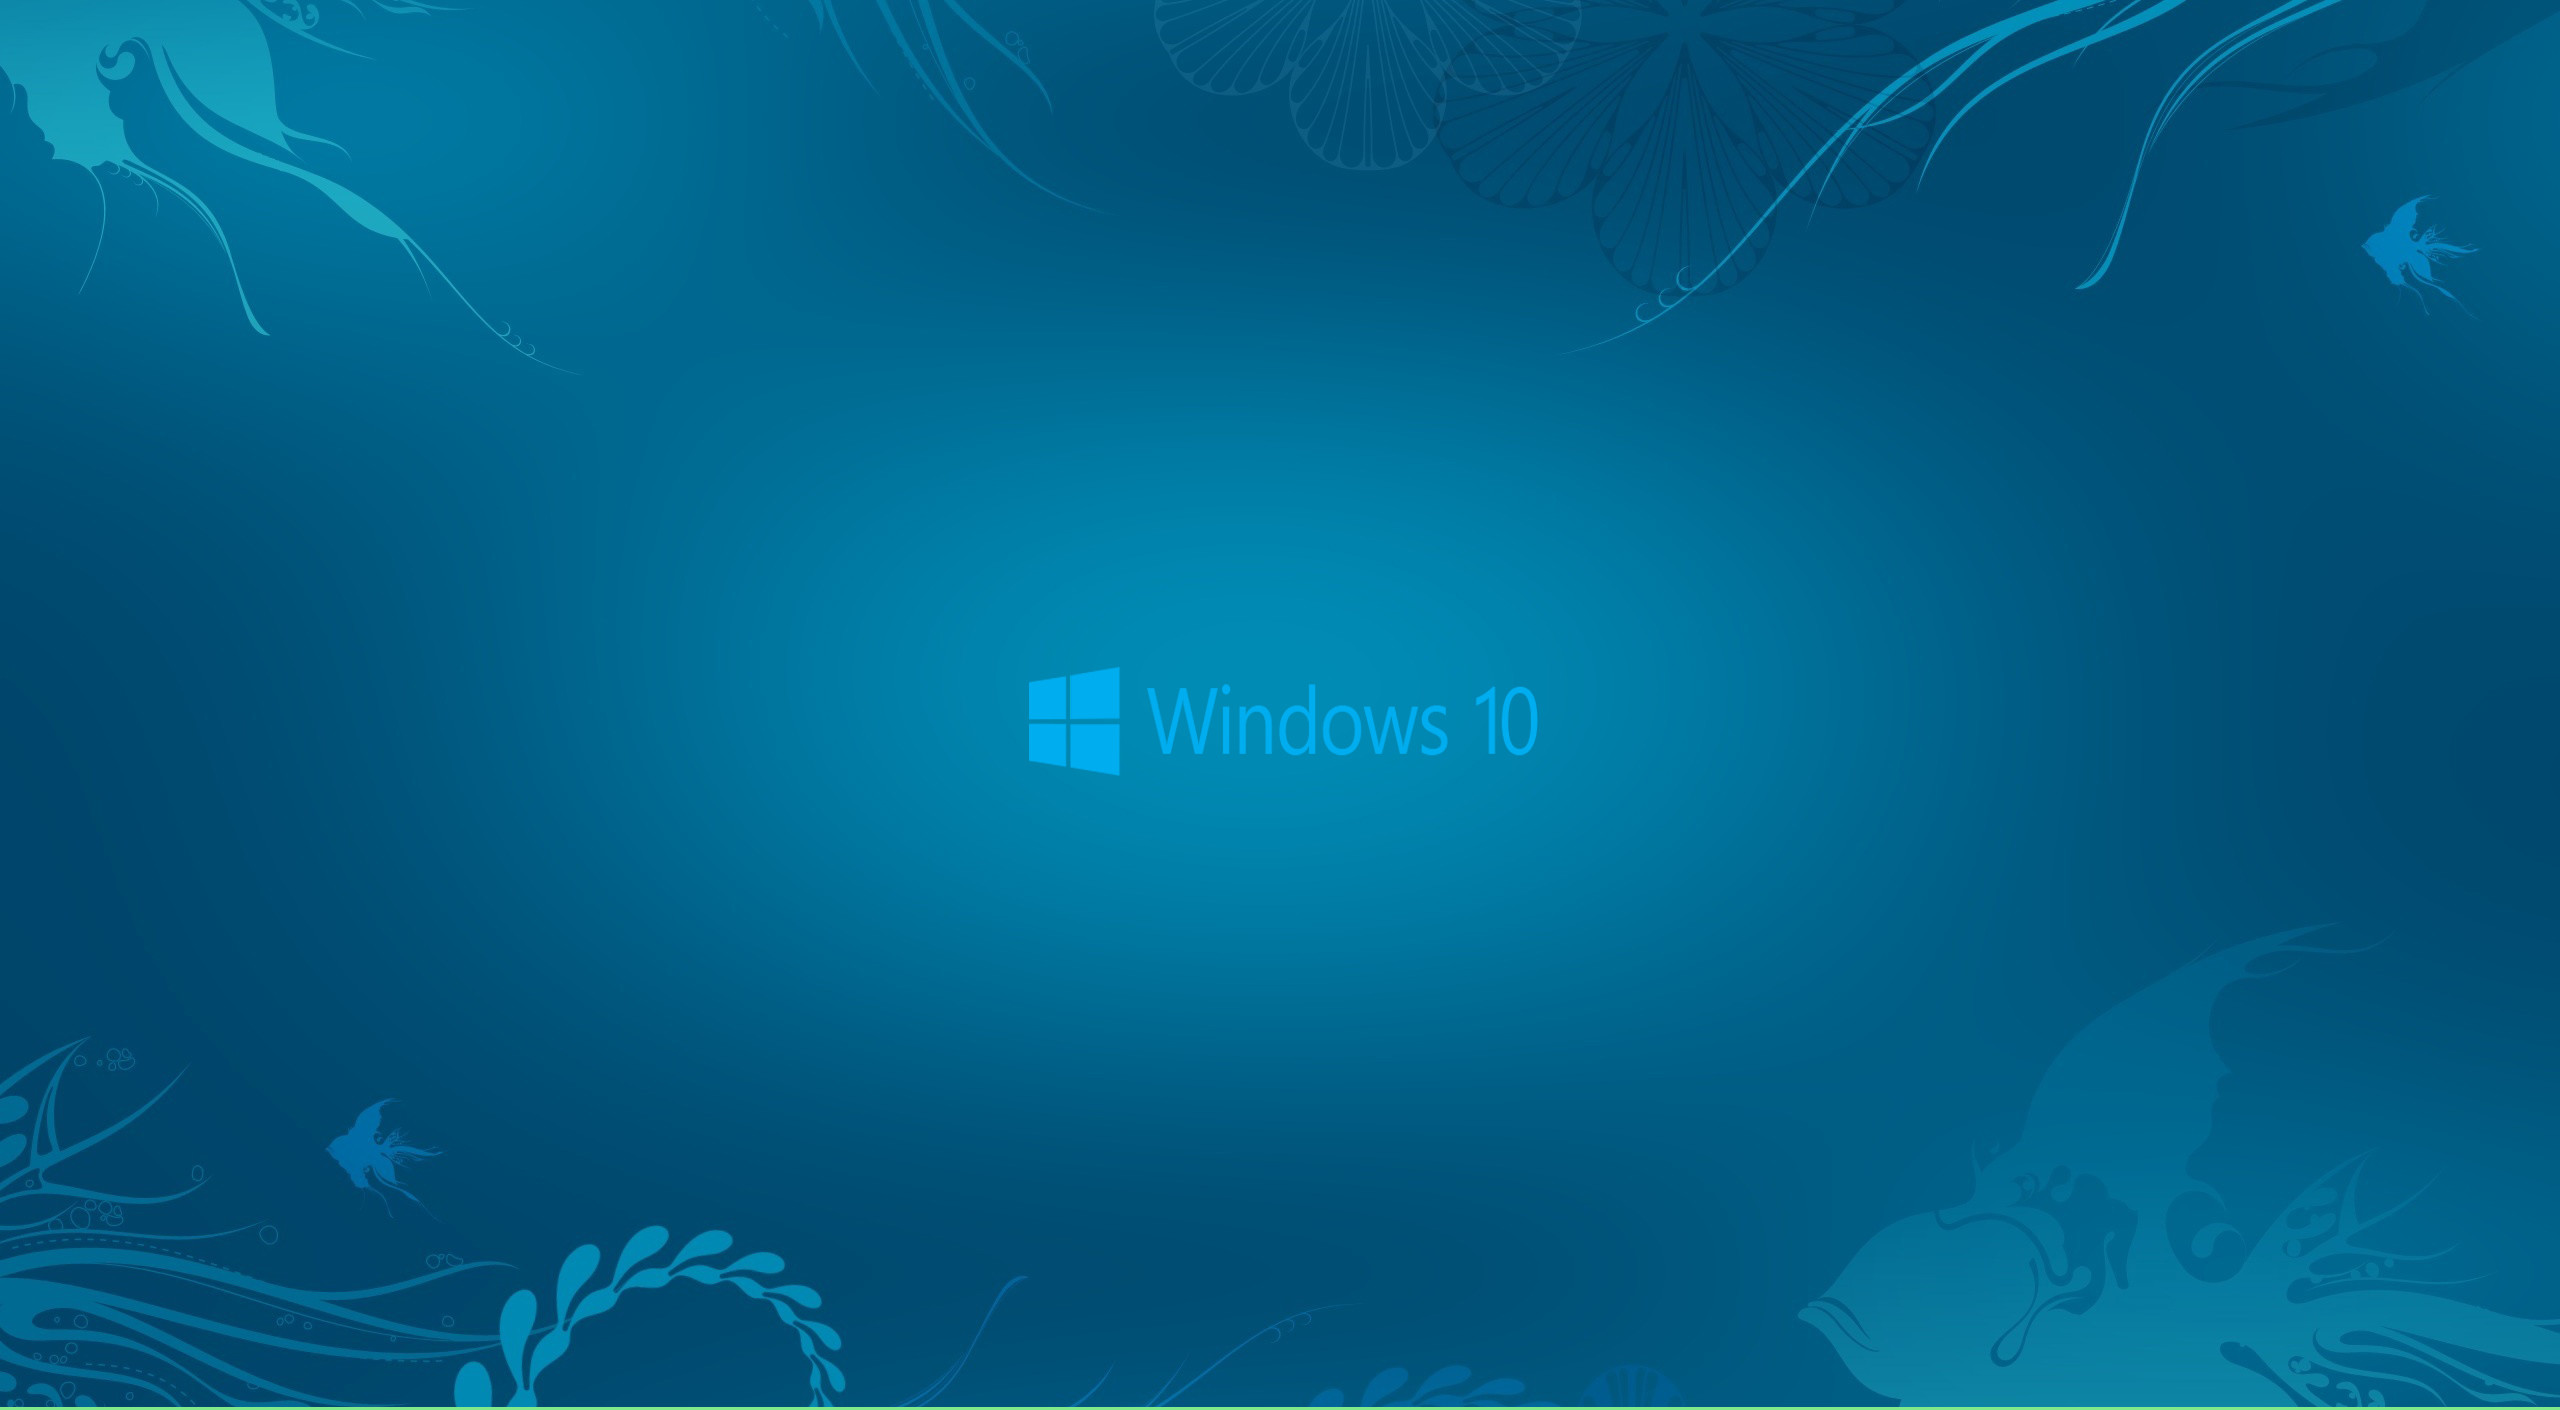 2560x1410 Windows 10 Wallpaper in Abstract Deep Blue See and New Logo | HD .